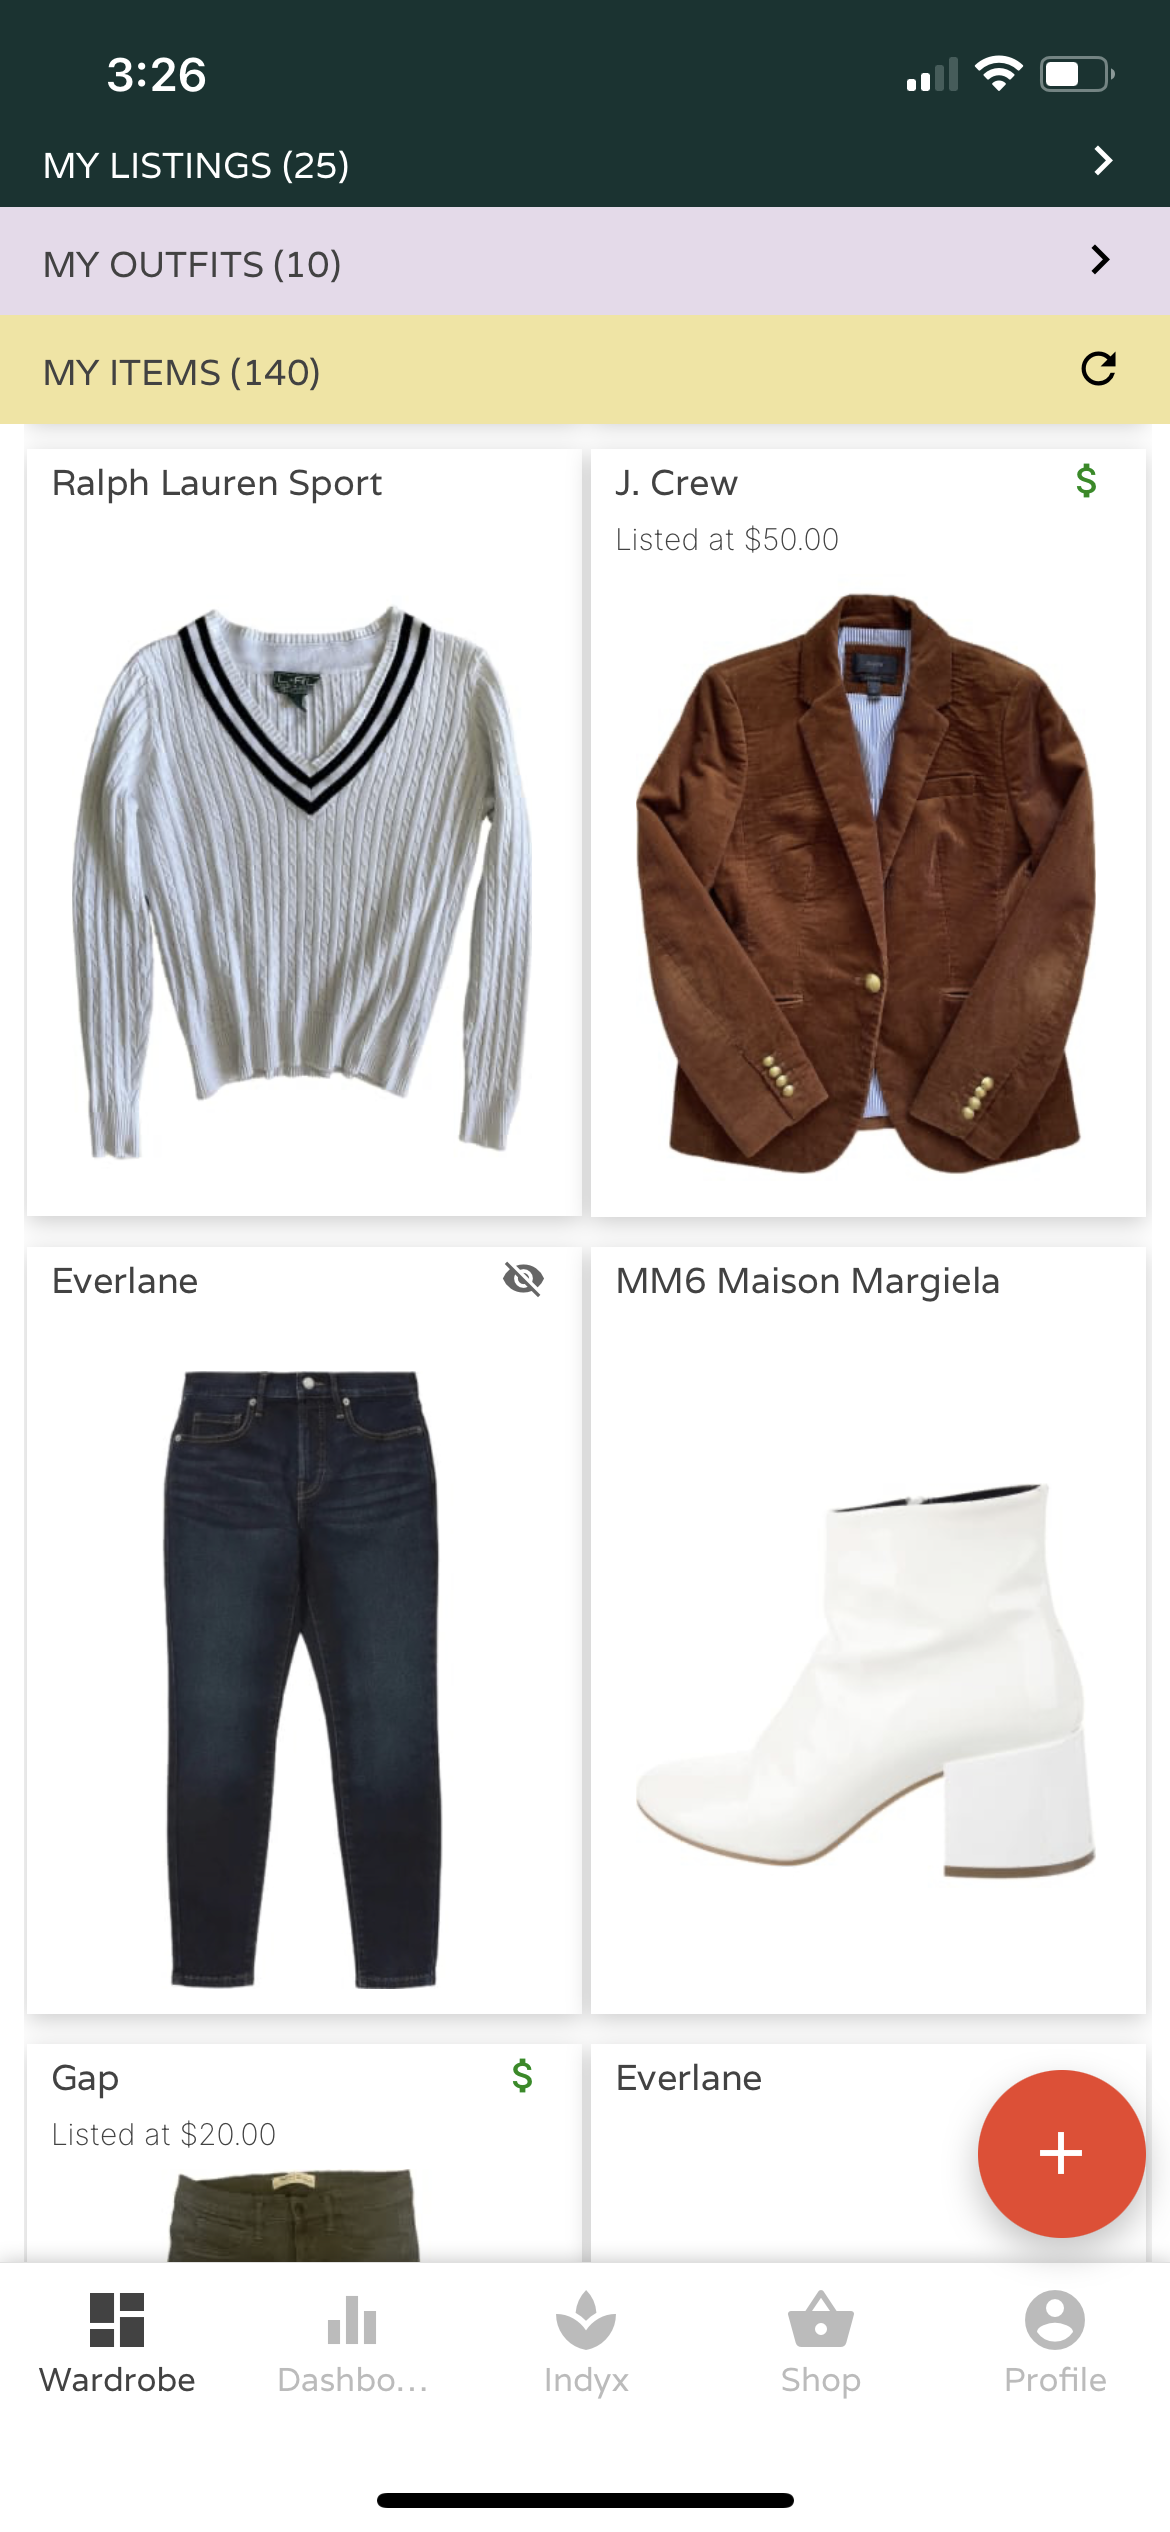 My wardrobe with an item listed for resale